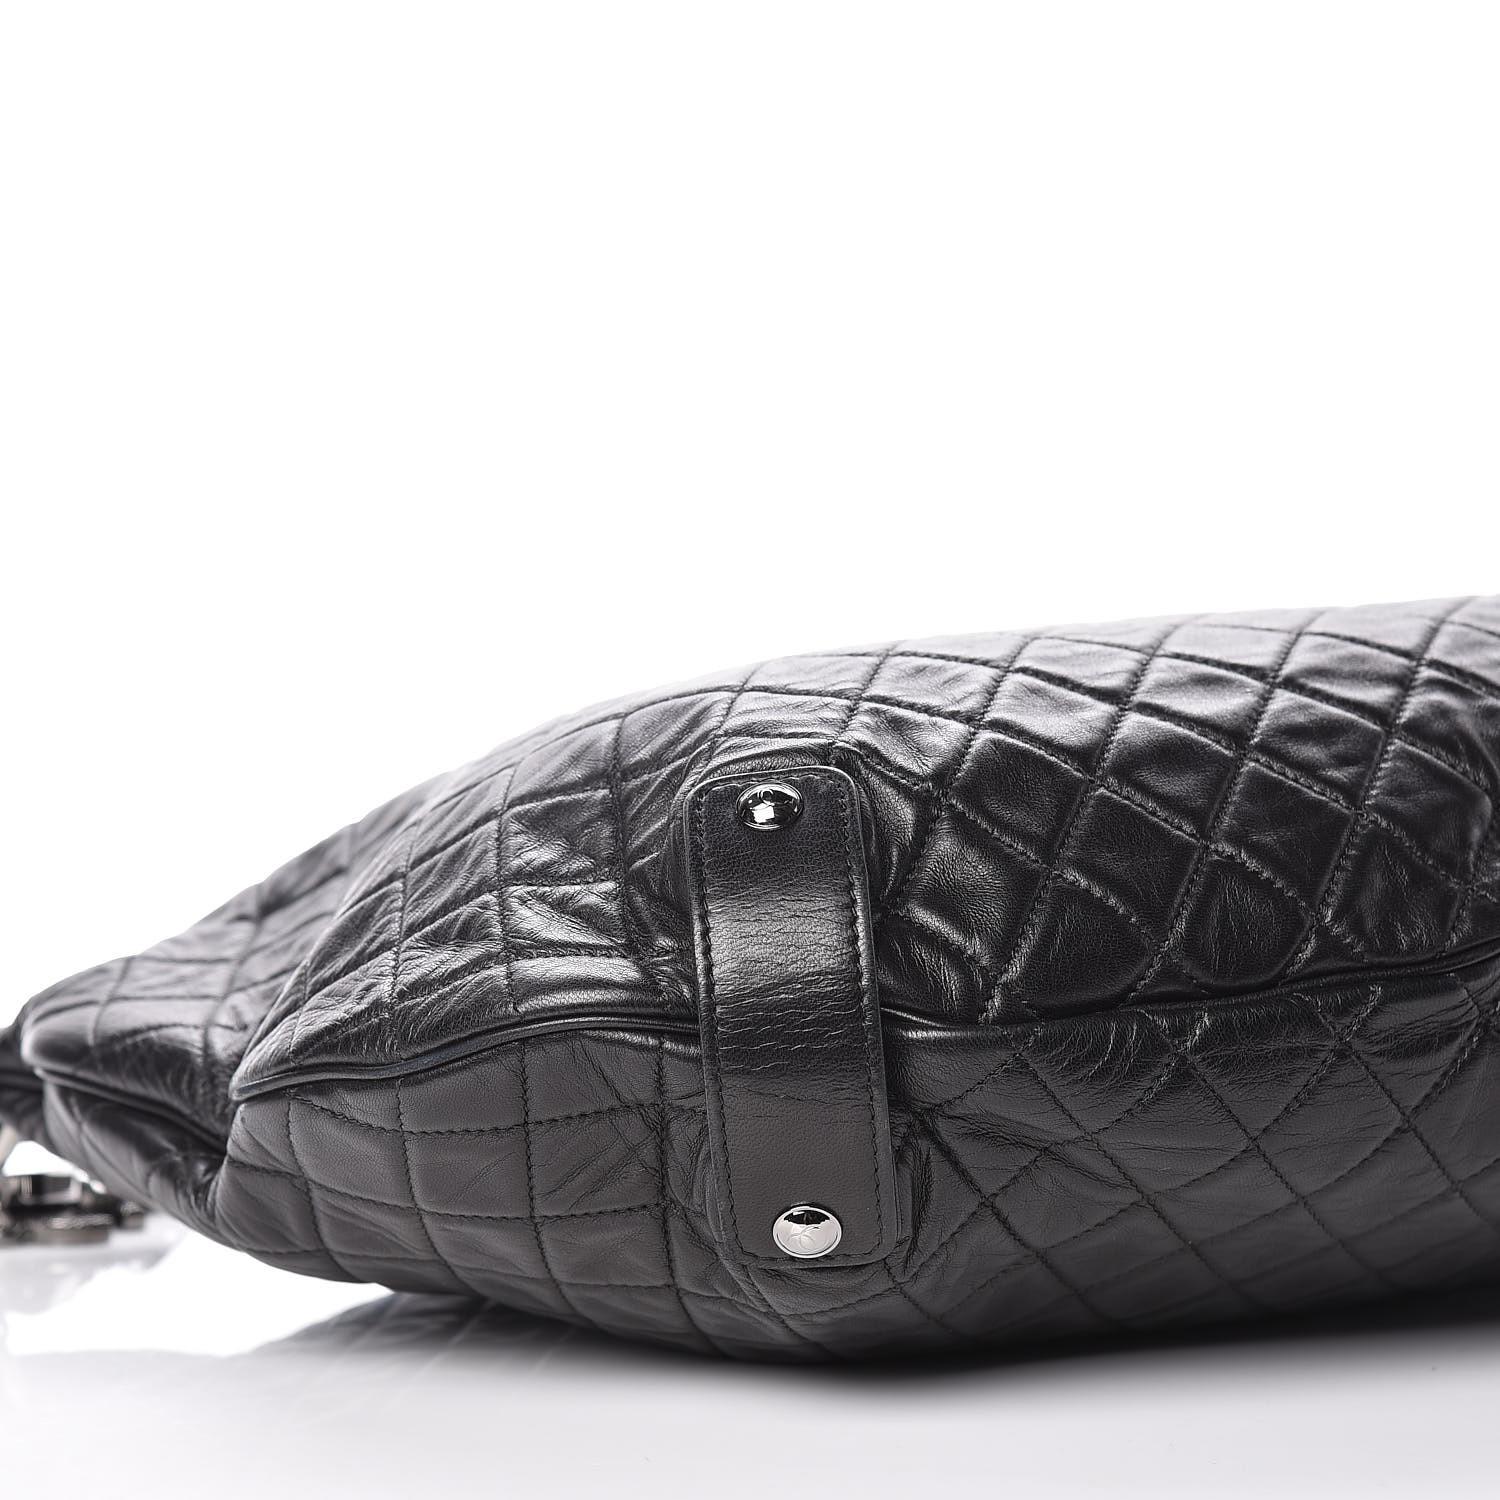 Chanel 2008 Metallic Mesh Soft Quilted Black Lambskin Leather Large Hobo Bag For Sale 8